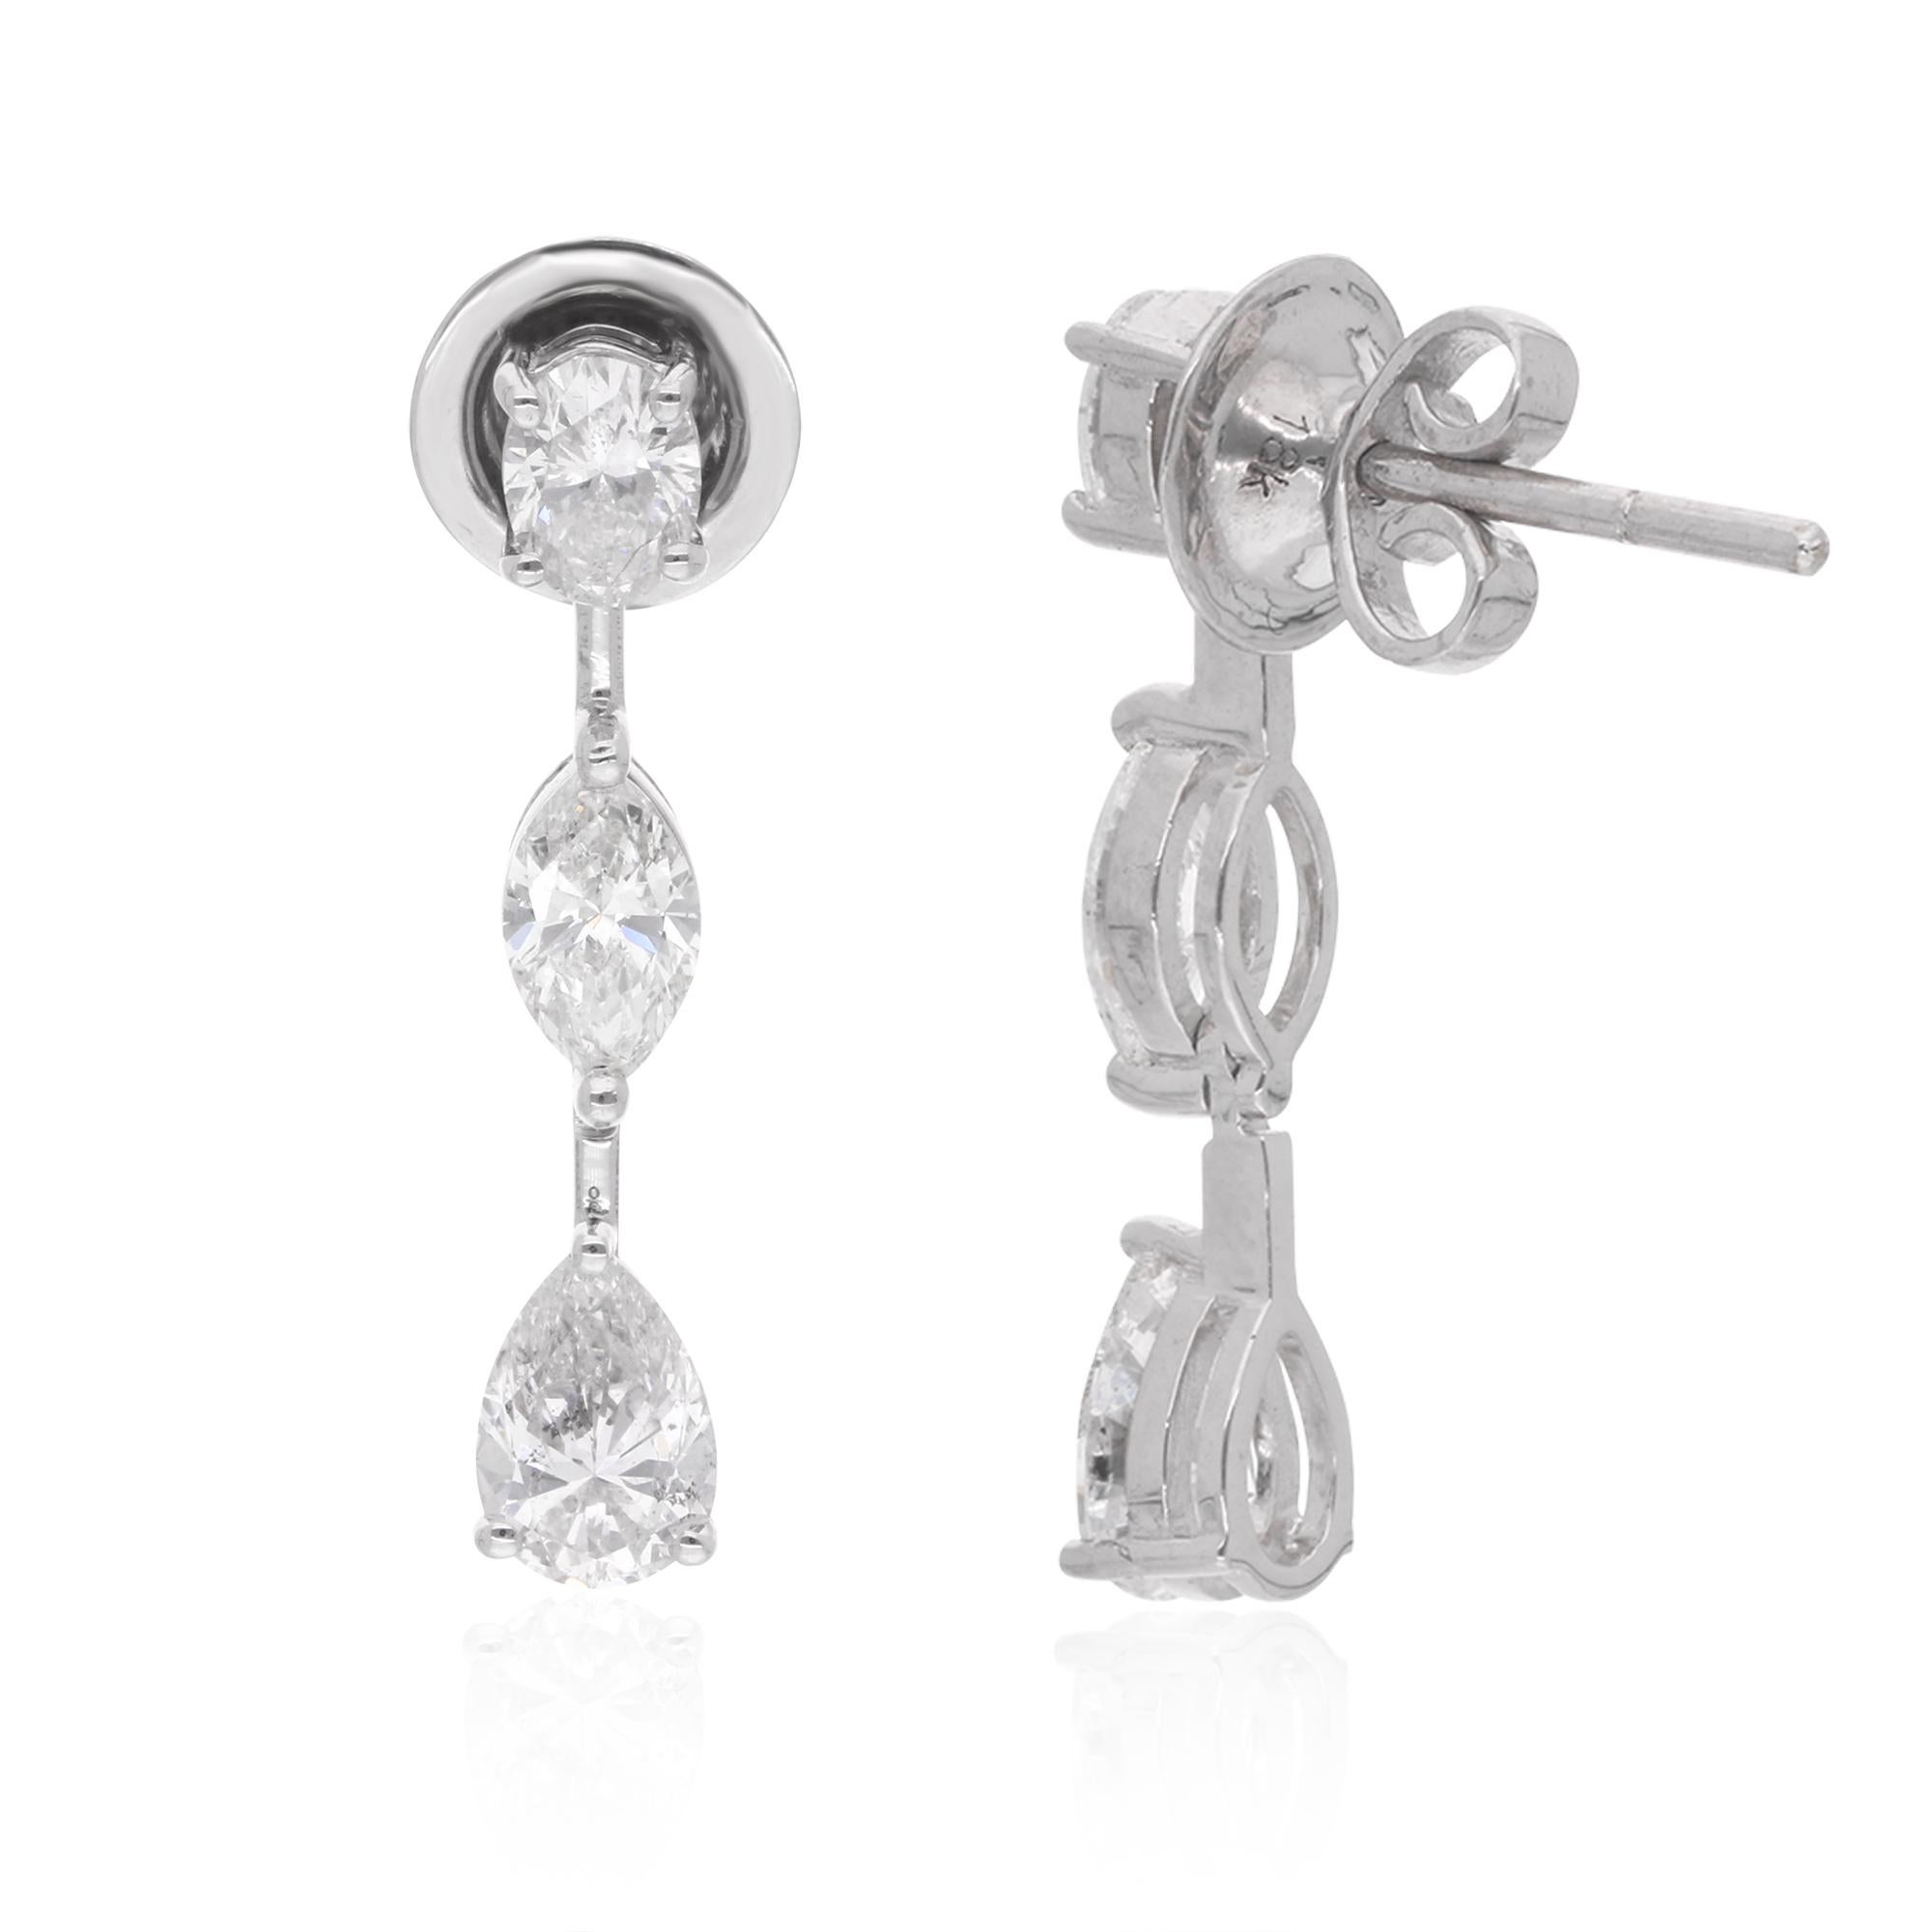 These exquisite earrings boast an impressive total weight of 2.16 carats, showcasing a stunning combination of oval, marquise, and pear-shaped diamonds. Crafted with meticulous attention to detail, they are set in luxurious 18 karat white gold,